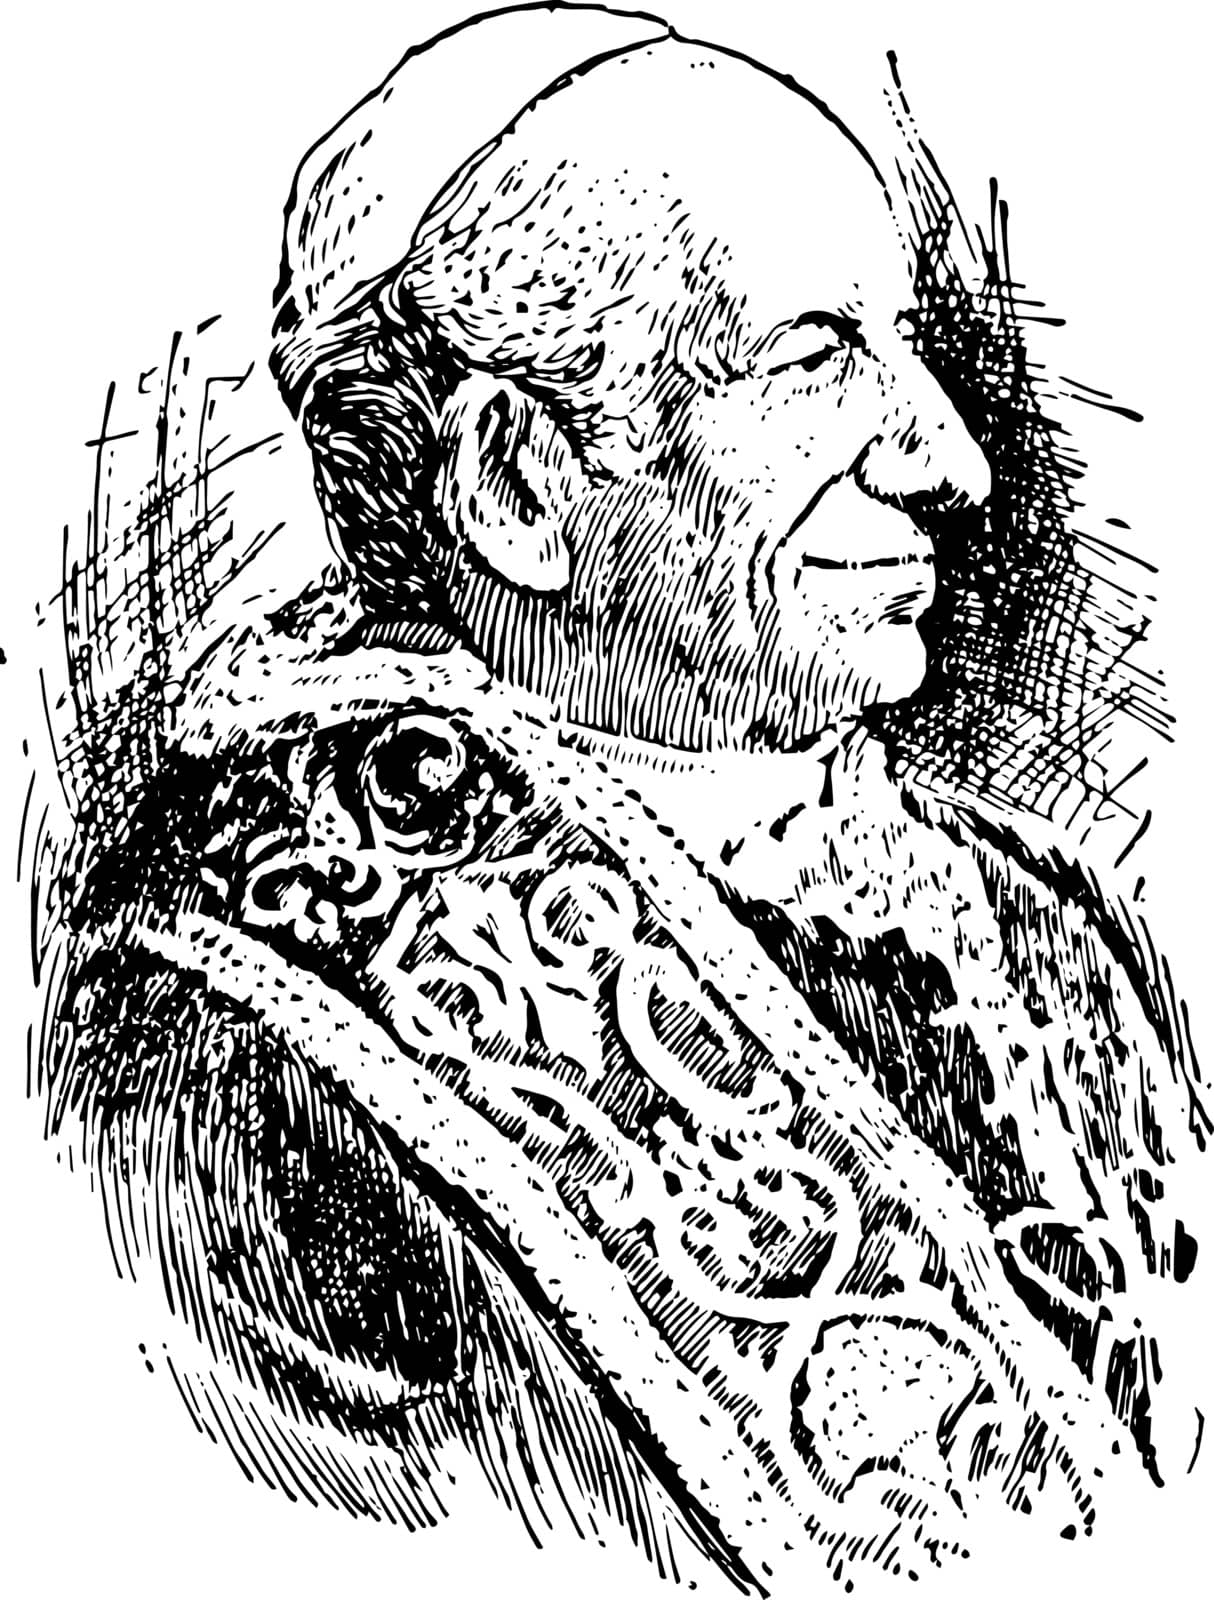 Leo XIII 1810 to 1903 he was a pope from 1878 to 1903 vintage line drawing or engraving illustration